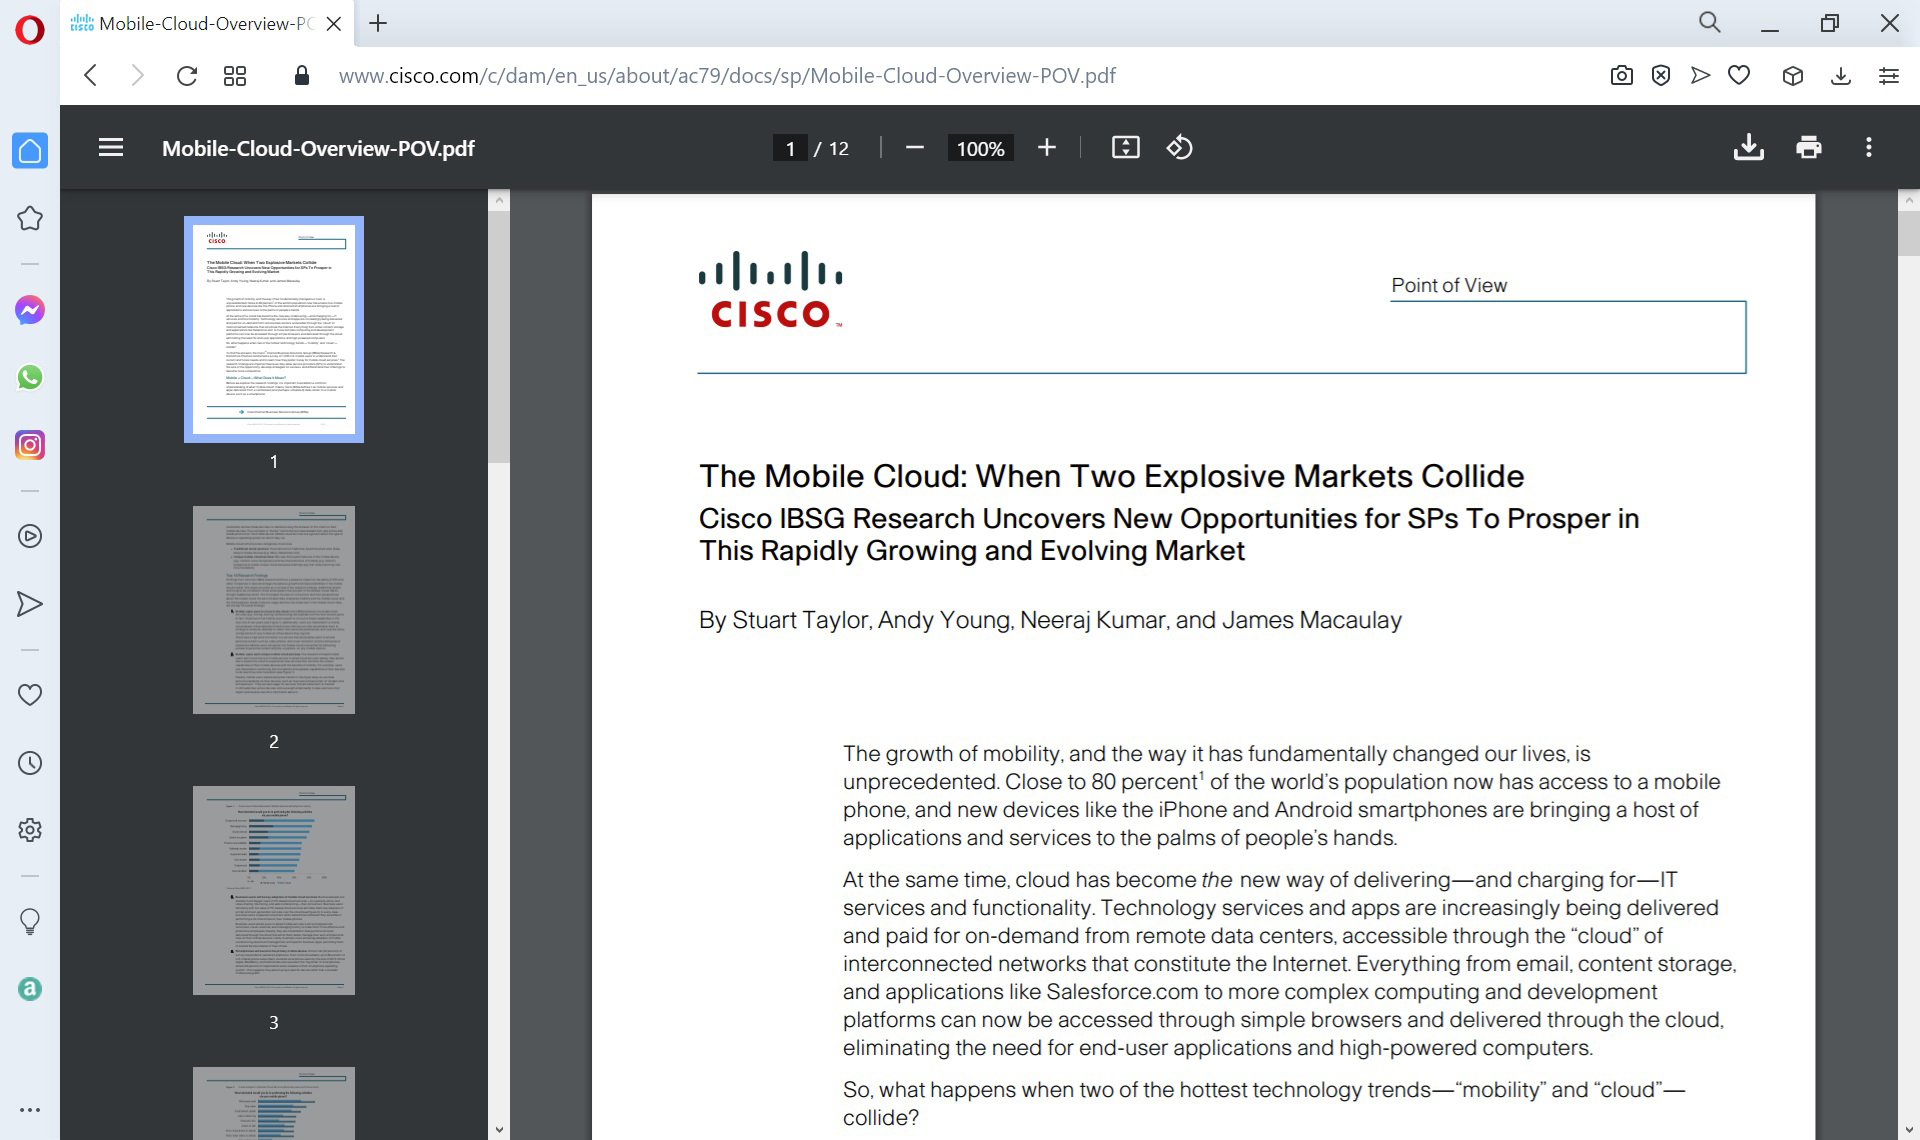 Cisco is indicated at top left of the report. The report reads as follows: The Mobile Cloud: When Two Explosive Markets Collide. Cisco I B S G Research Uncovers New Opportunities for S Ps To Prosper in This Rapidly Growing and Evolving Market. By Stuart Taylor, Andy Young, Neeraj Kumar, and James Macaulay. The growth of mobility, and the way it has fundamentally changed our lives, is unprecedented. Close to 80 percent of the world’s population now has access to a mobile phone, and new devices like the iPhone and Android smartphones are bringing a host of applications and services to the palms of people’s hands. At the same time, cloud has become the new way of delivering, and charging for, I T services and functionality. Technology services and apps are increasingly being delivered and paid for on-demand from remote data centers, accessible through the “cloud” of interconnected networks that constitute the Internet. Everything from email, content storage, and applications like Salesforce.com to more complex computing and development platforms can now be accessed through simple browsers and delivered through the cloud, eliminating the need for end-user applications and high-powered computers. So, what happens when two of the hottest technology trends, “mobility” and “cloud,” collide?